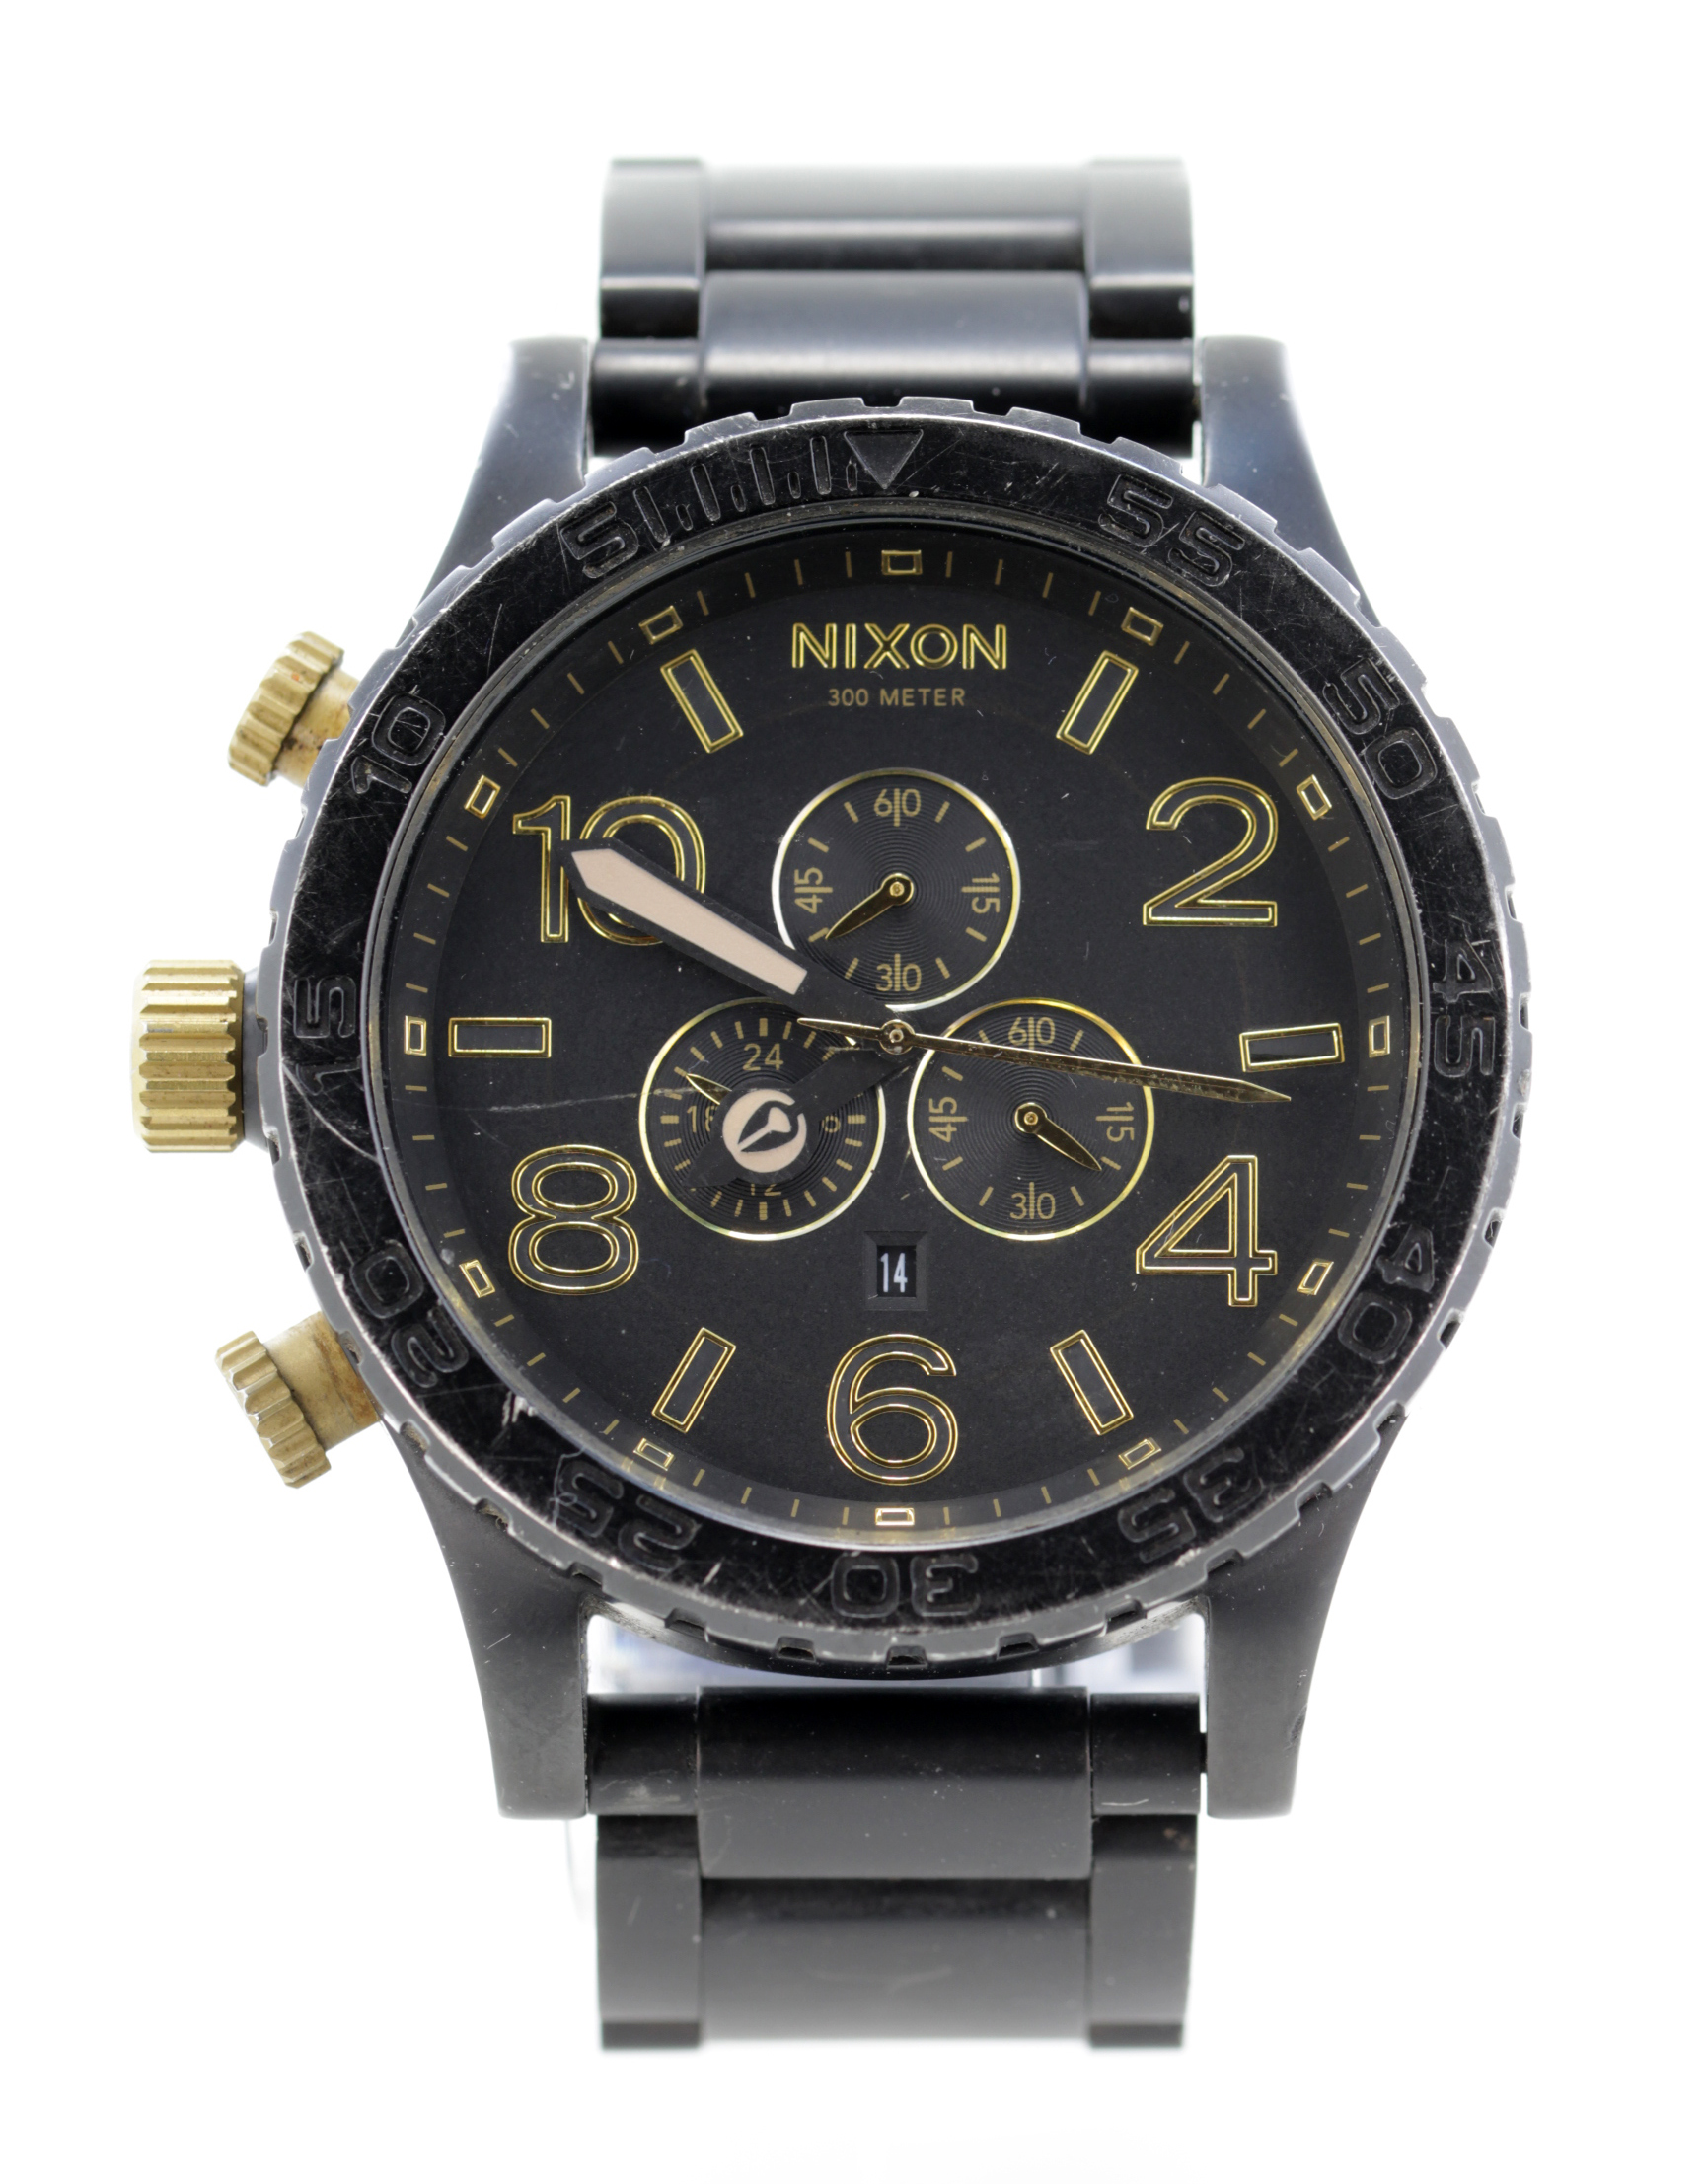 Gents 51-30 Chrono by Nixon. The 51mm dial with three subsidiary dials and date aperture above 6 o'